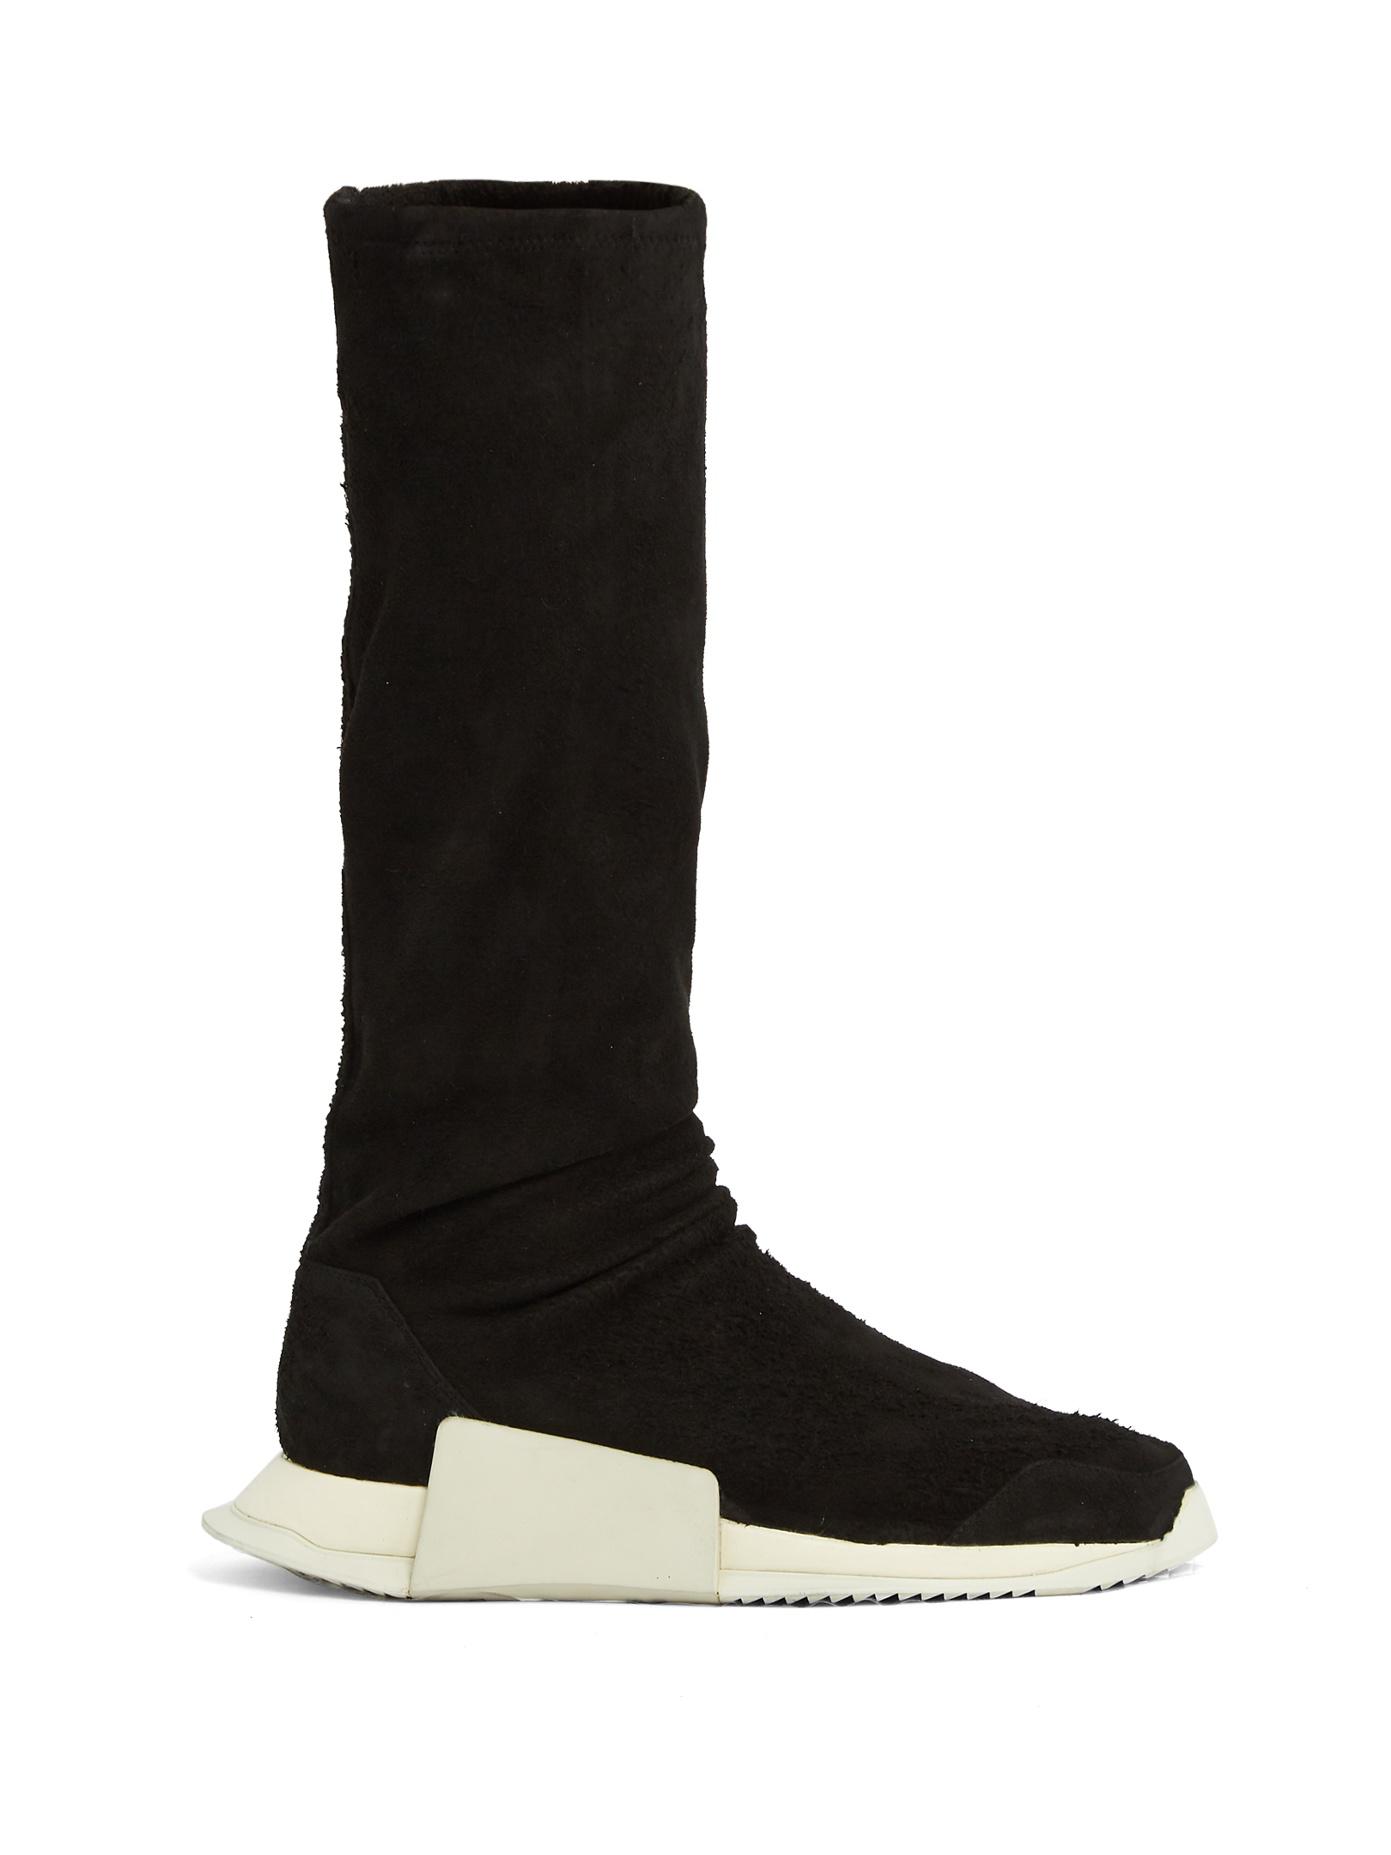 Rick Owens X Adidas Level Sock Suede Trainers in Black for Men - Lyst